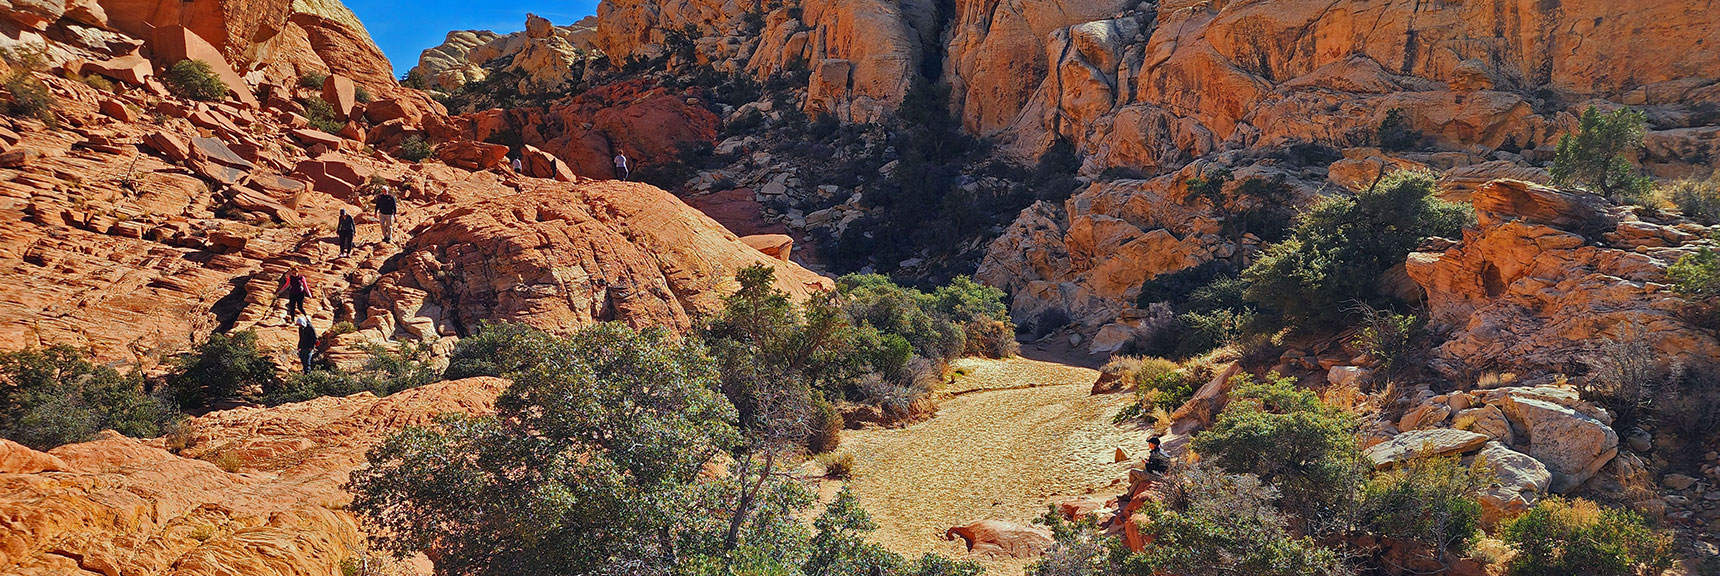 Arrival on the Popular Calico Tanks Trail. Seeing Hikers for First Time Today. | Upper Calico Hills Loop | Calico Basin and Red Rock Canyon, Nevada